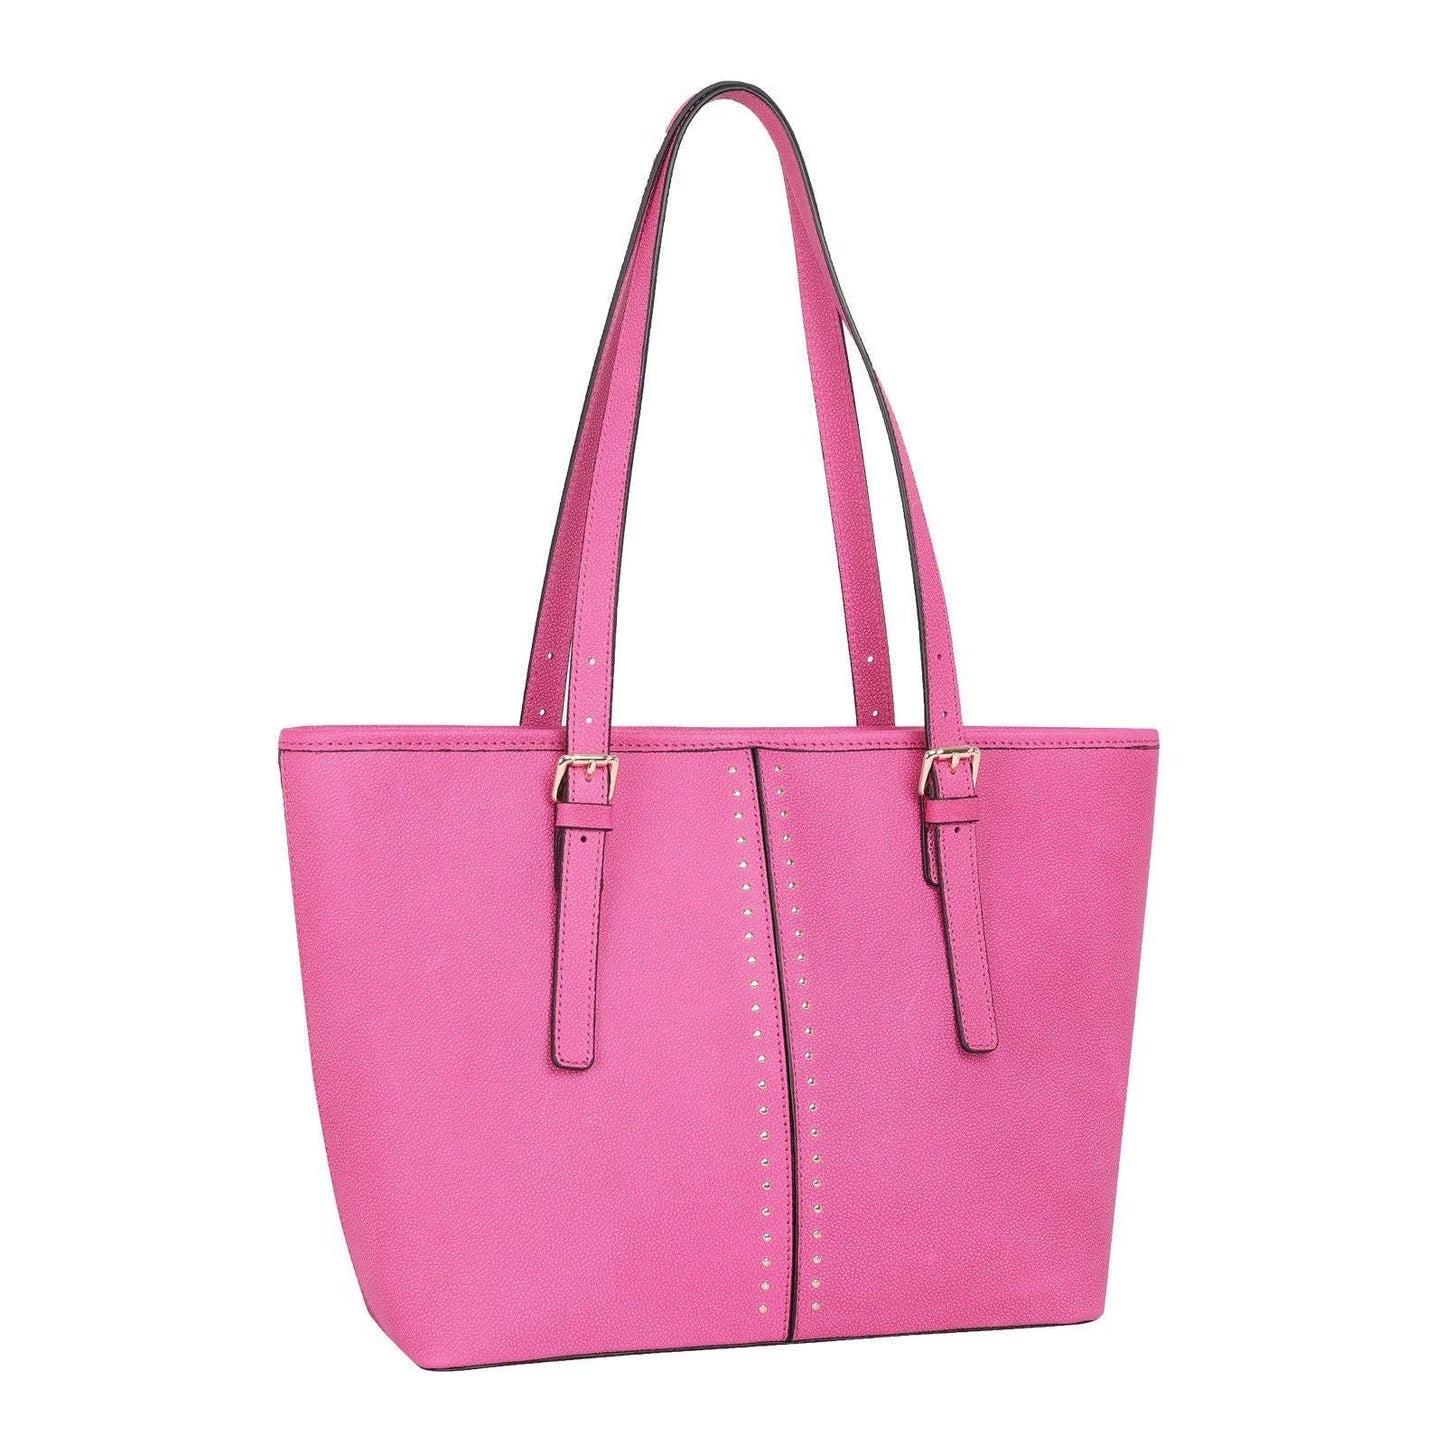 Montana West - MWRG-036 Montana West Real Leather Pink Tote: Hot Pink